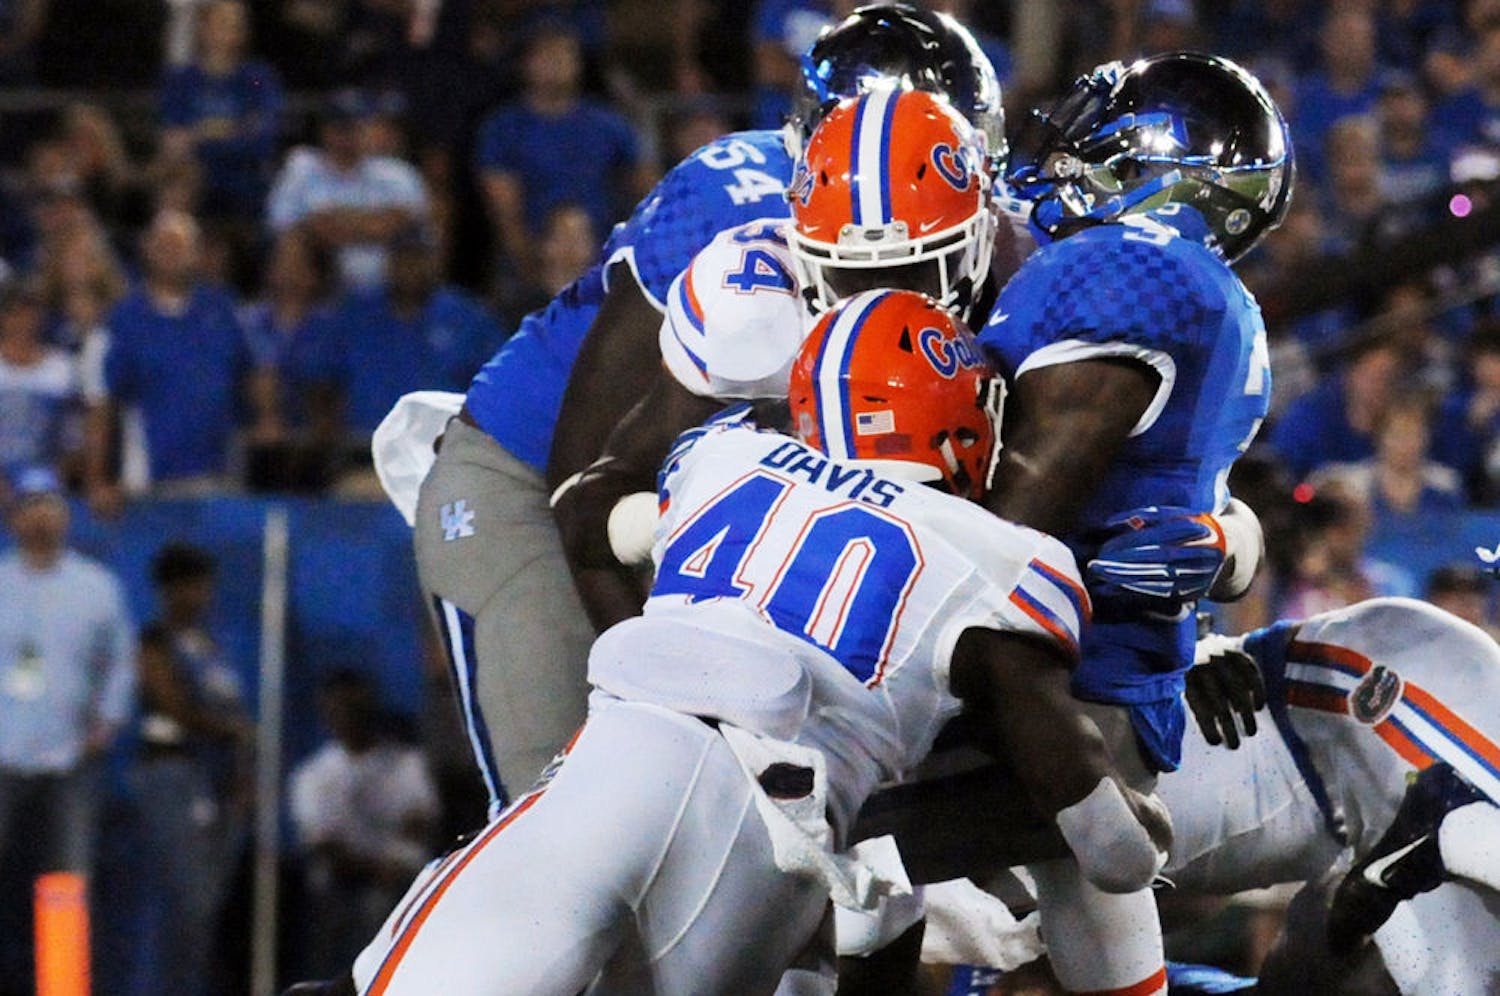 UF linebacker Jarrad Davis (40) and defensive lineman Bryan Cox Jr. record a tackle during Florida's 14-9 win against Kentucky on Sept. 19, 2015, at Commonwealth Stadium in Lexington, Kentucky.